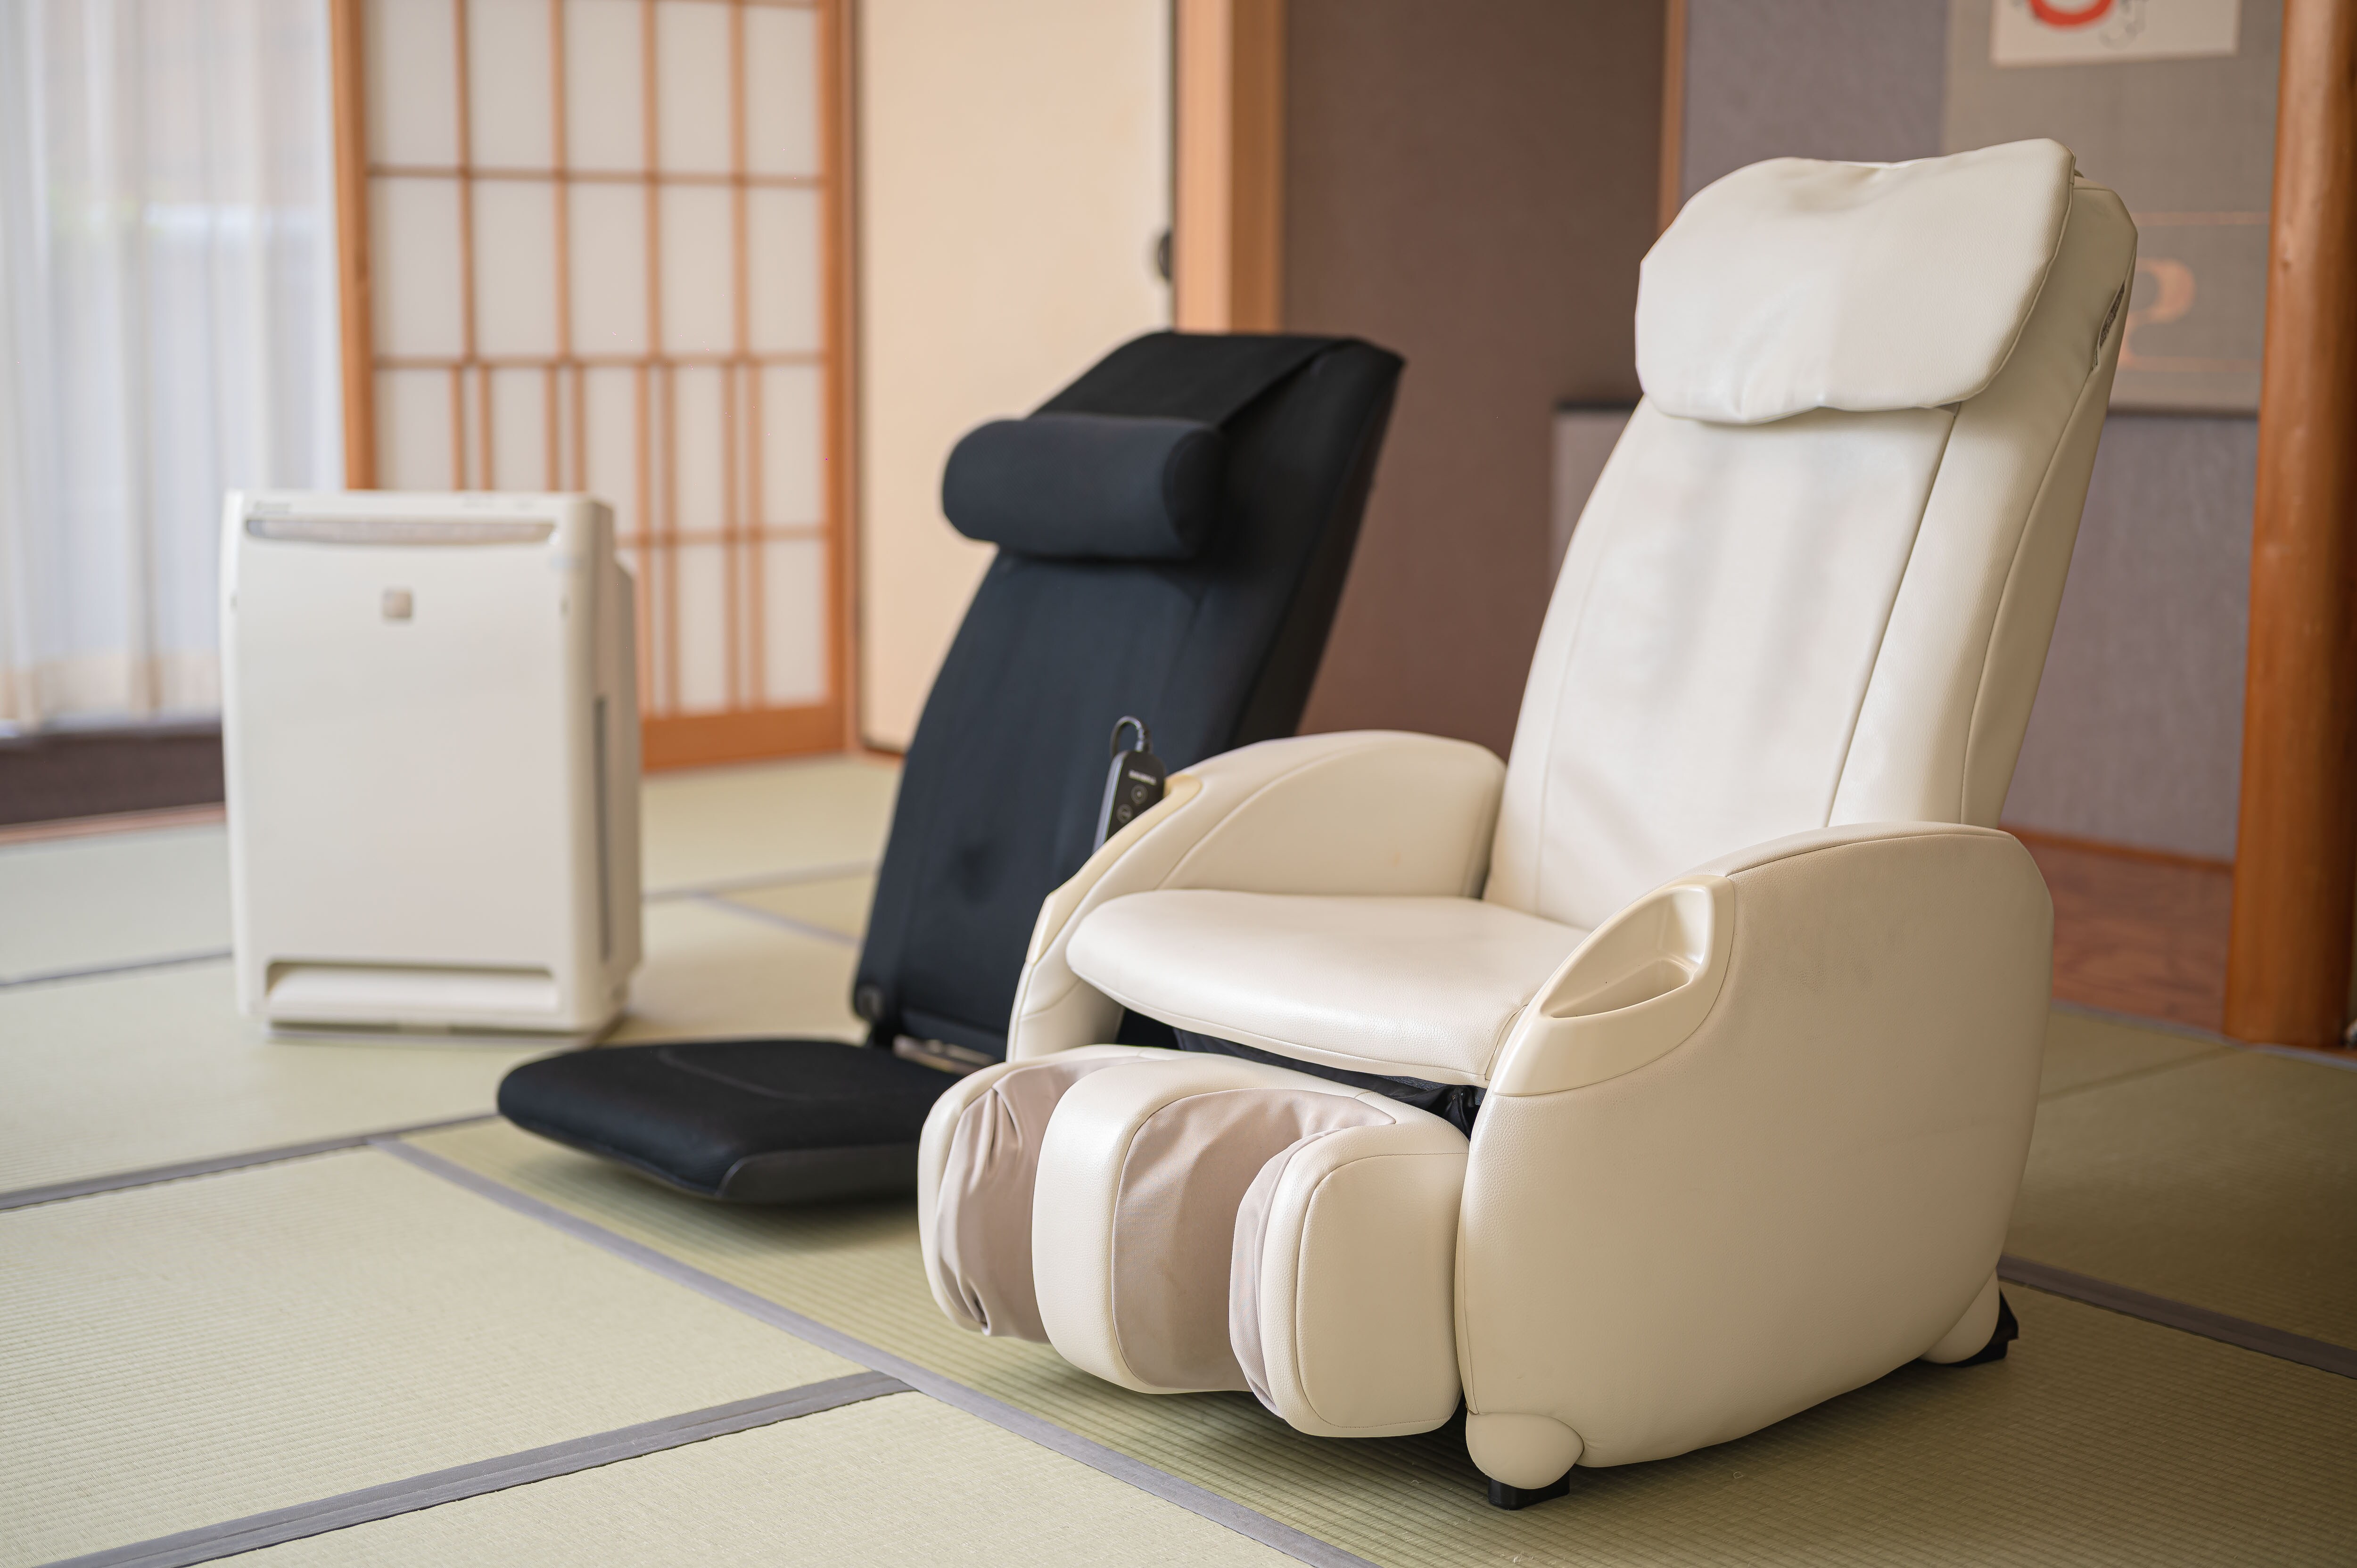 Guest rooms are equipped with massage chairs and air purifiers.